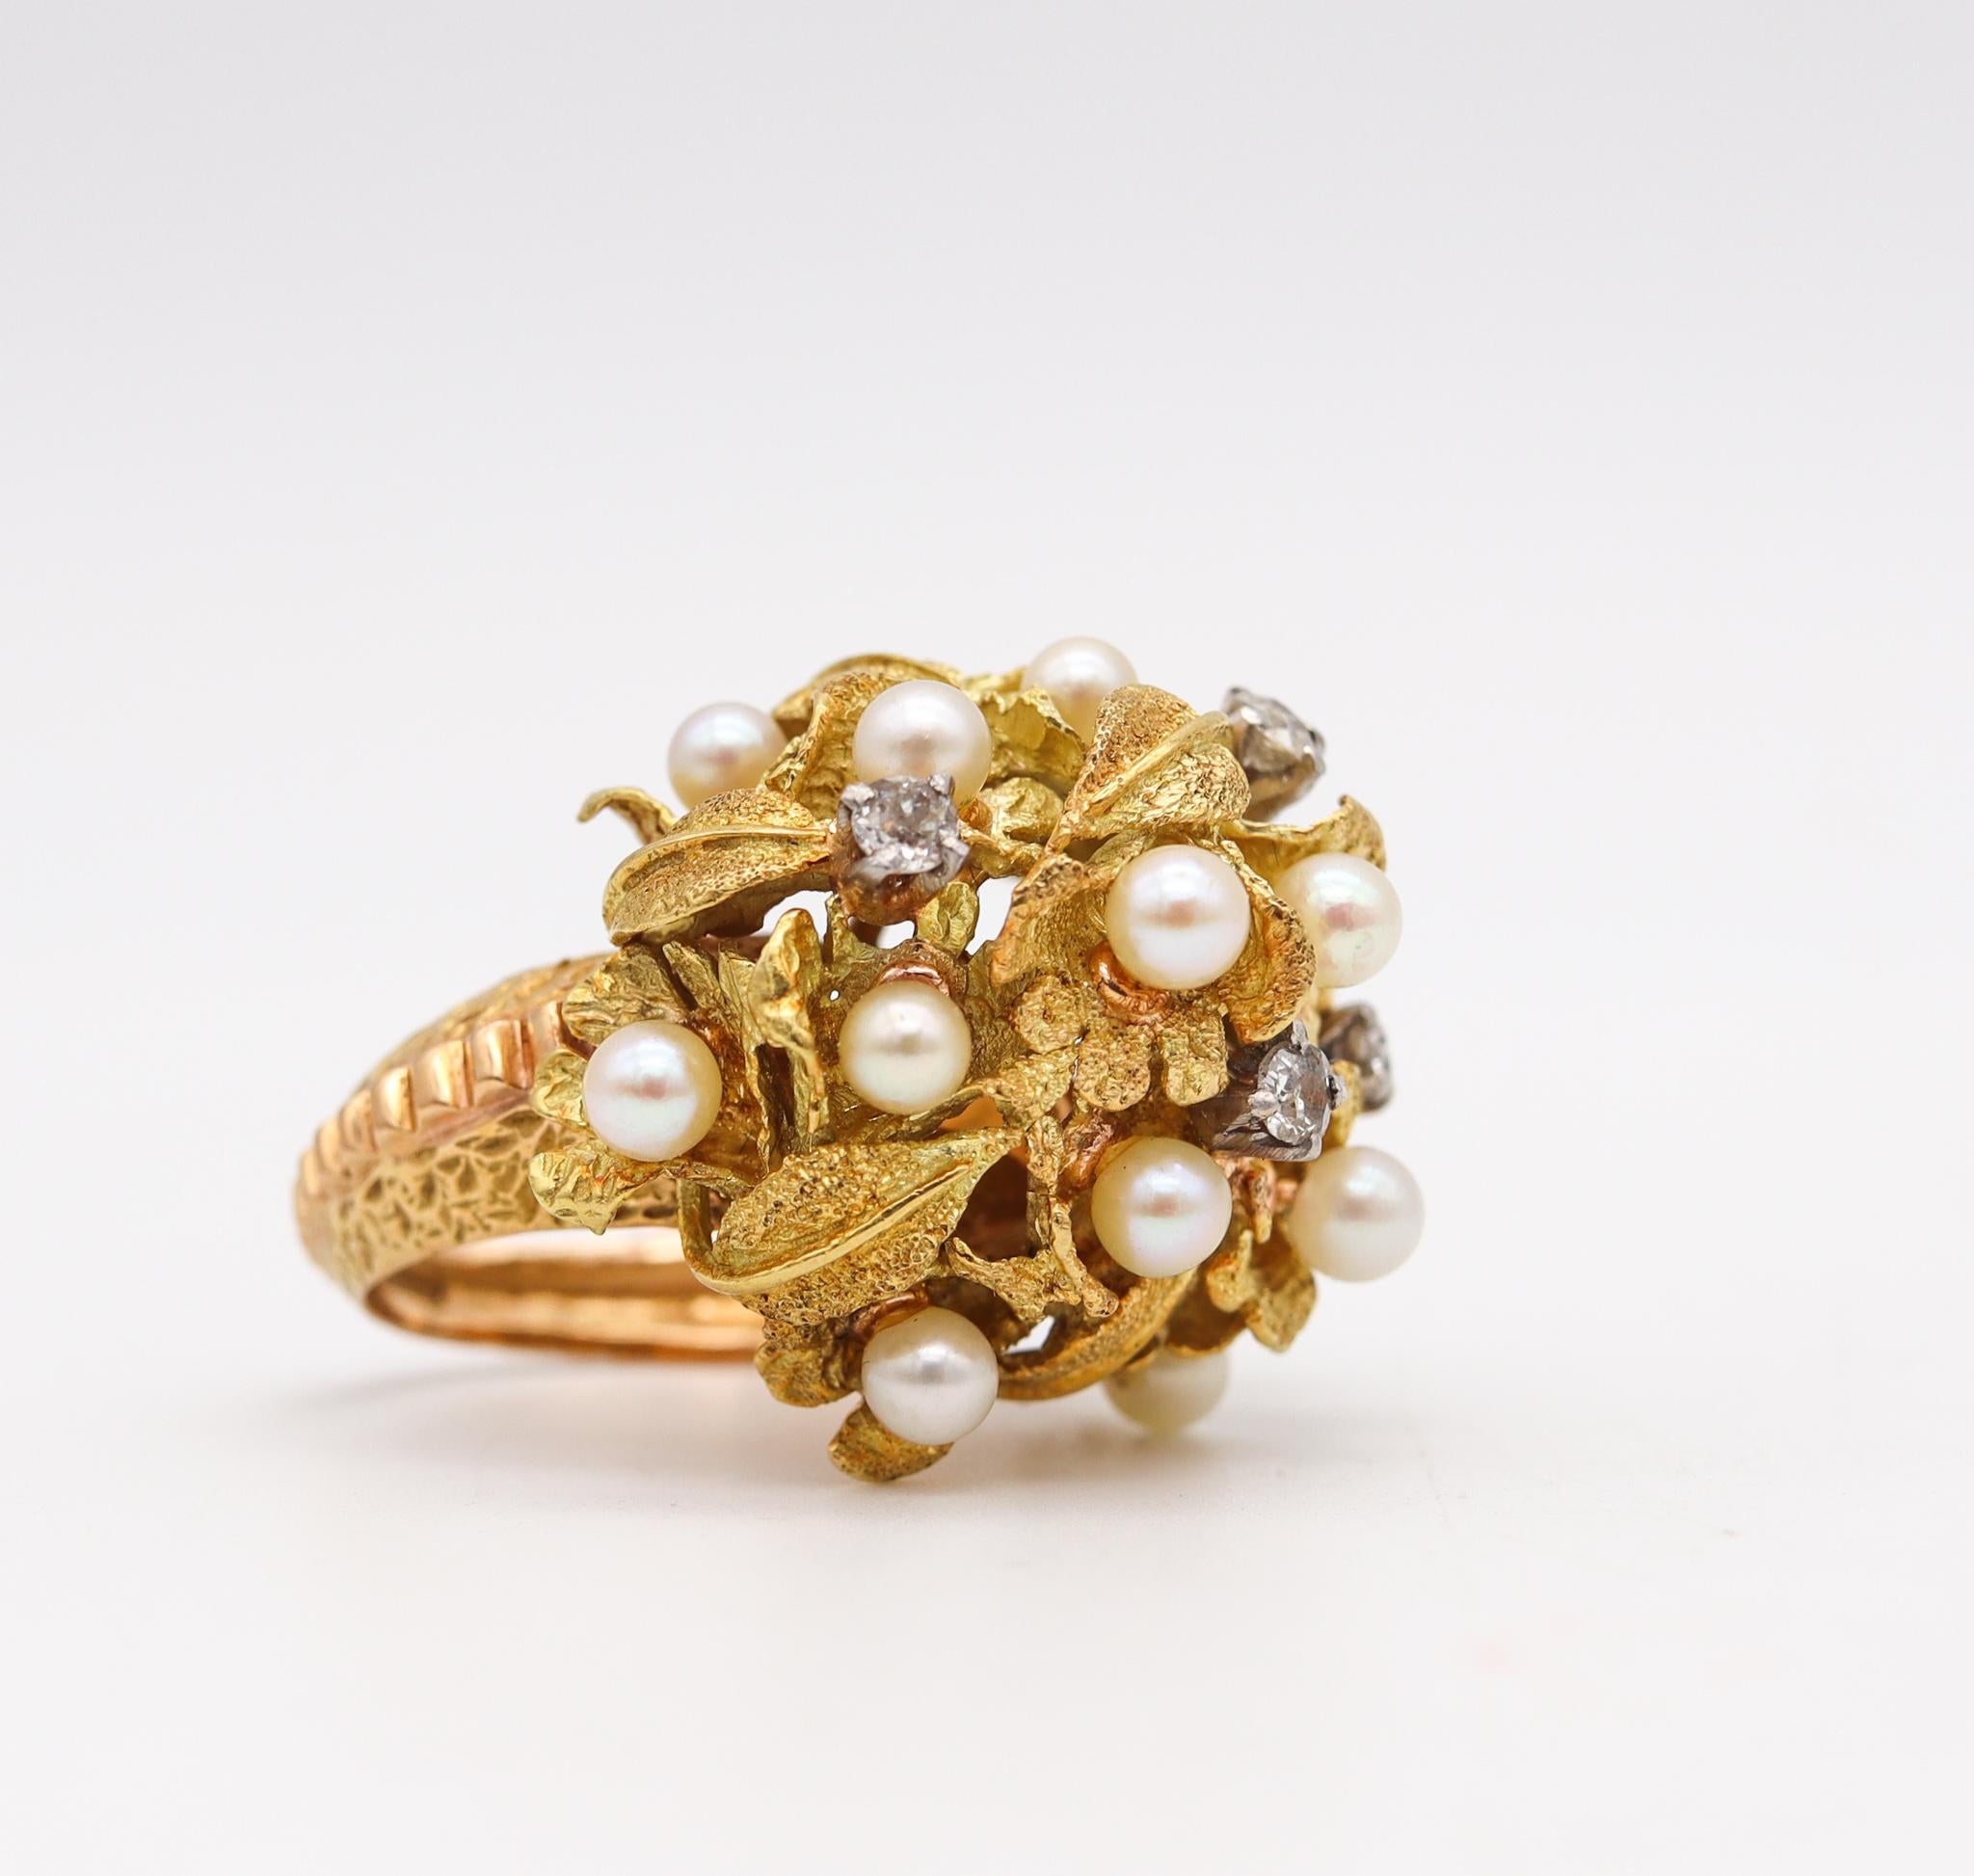 Retro Mid Century 1950 Post War Cocktail Ring 18Kt Gold Platinum with Pearls Diamonds